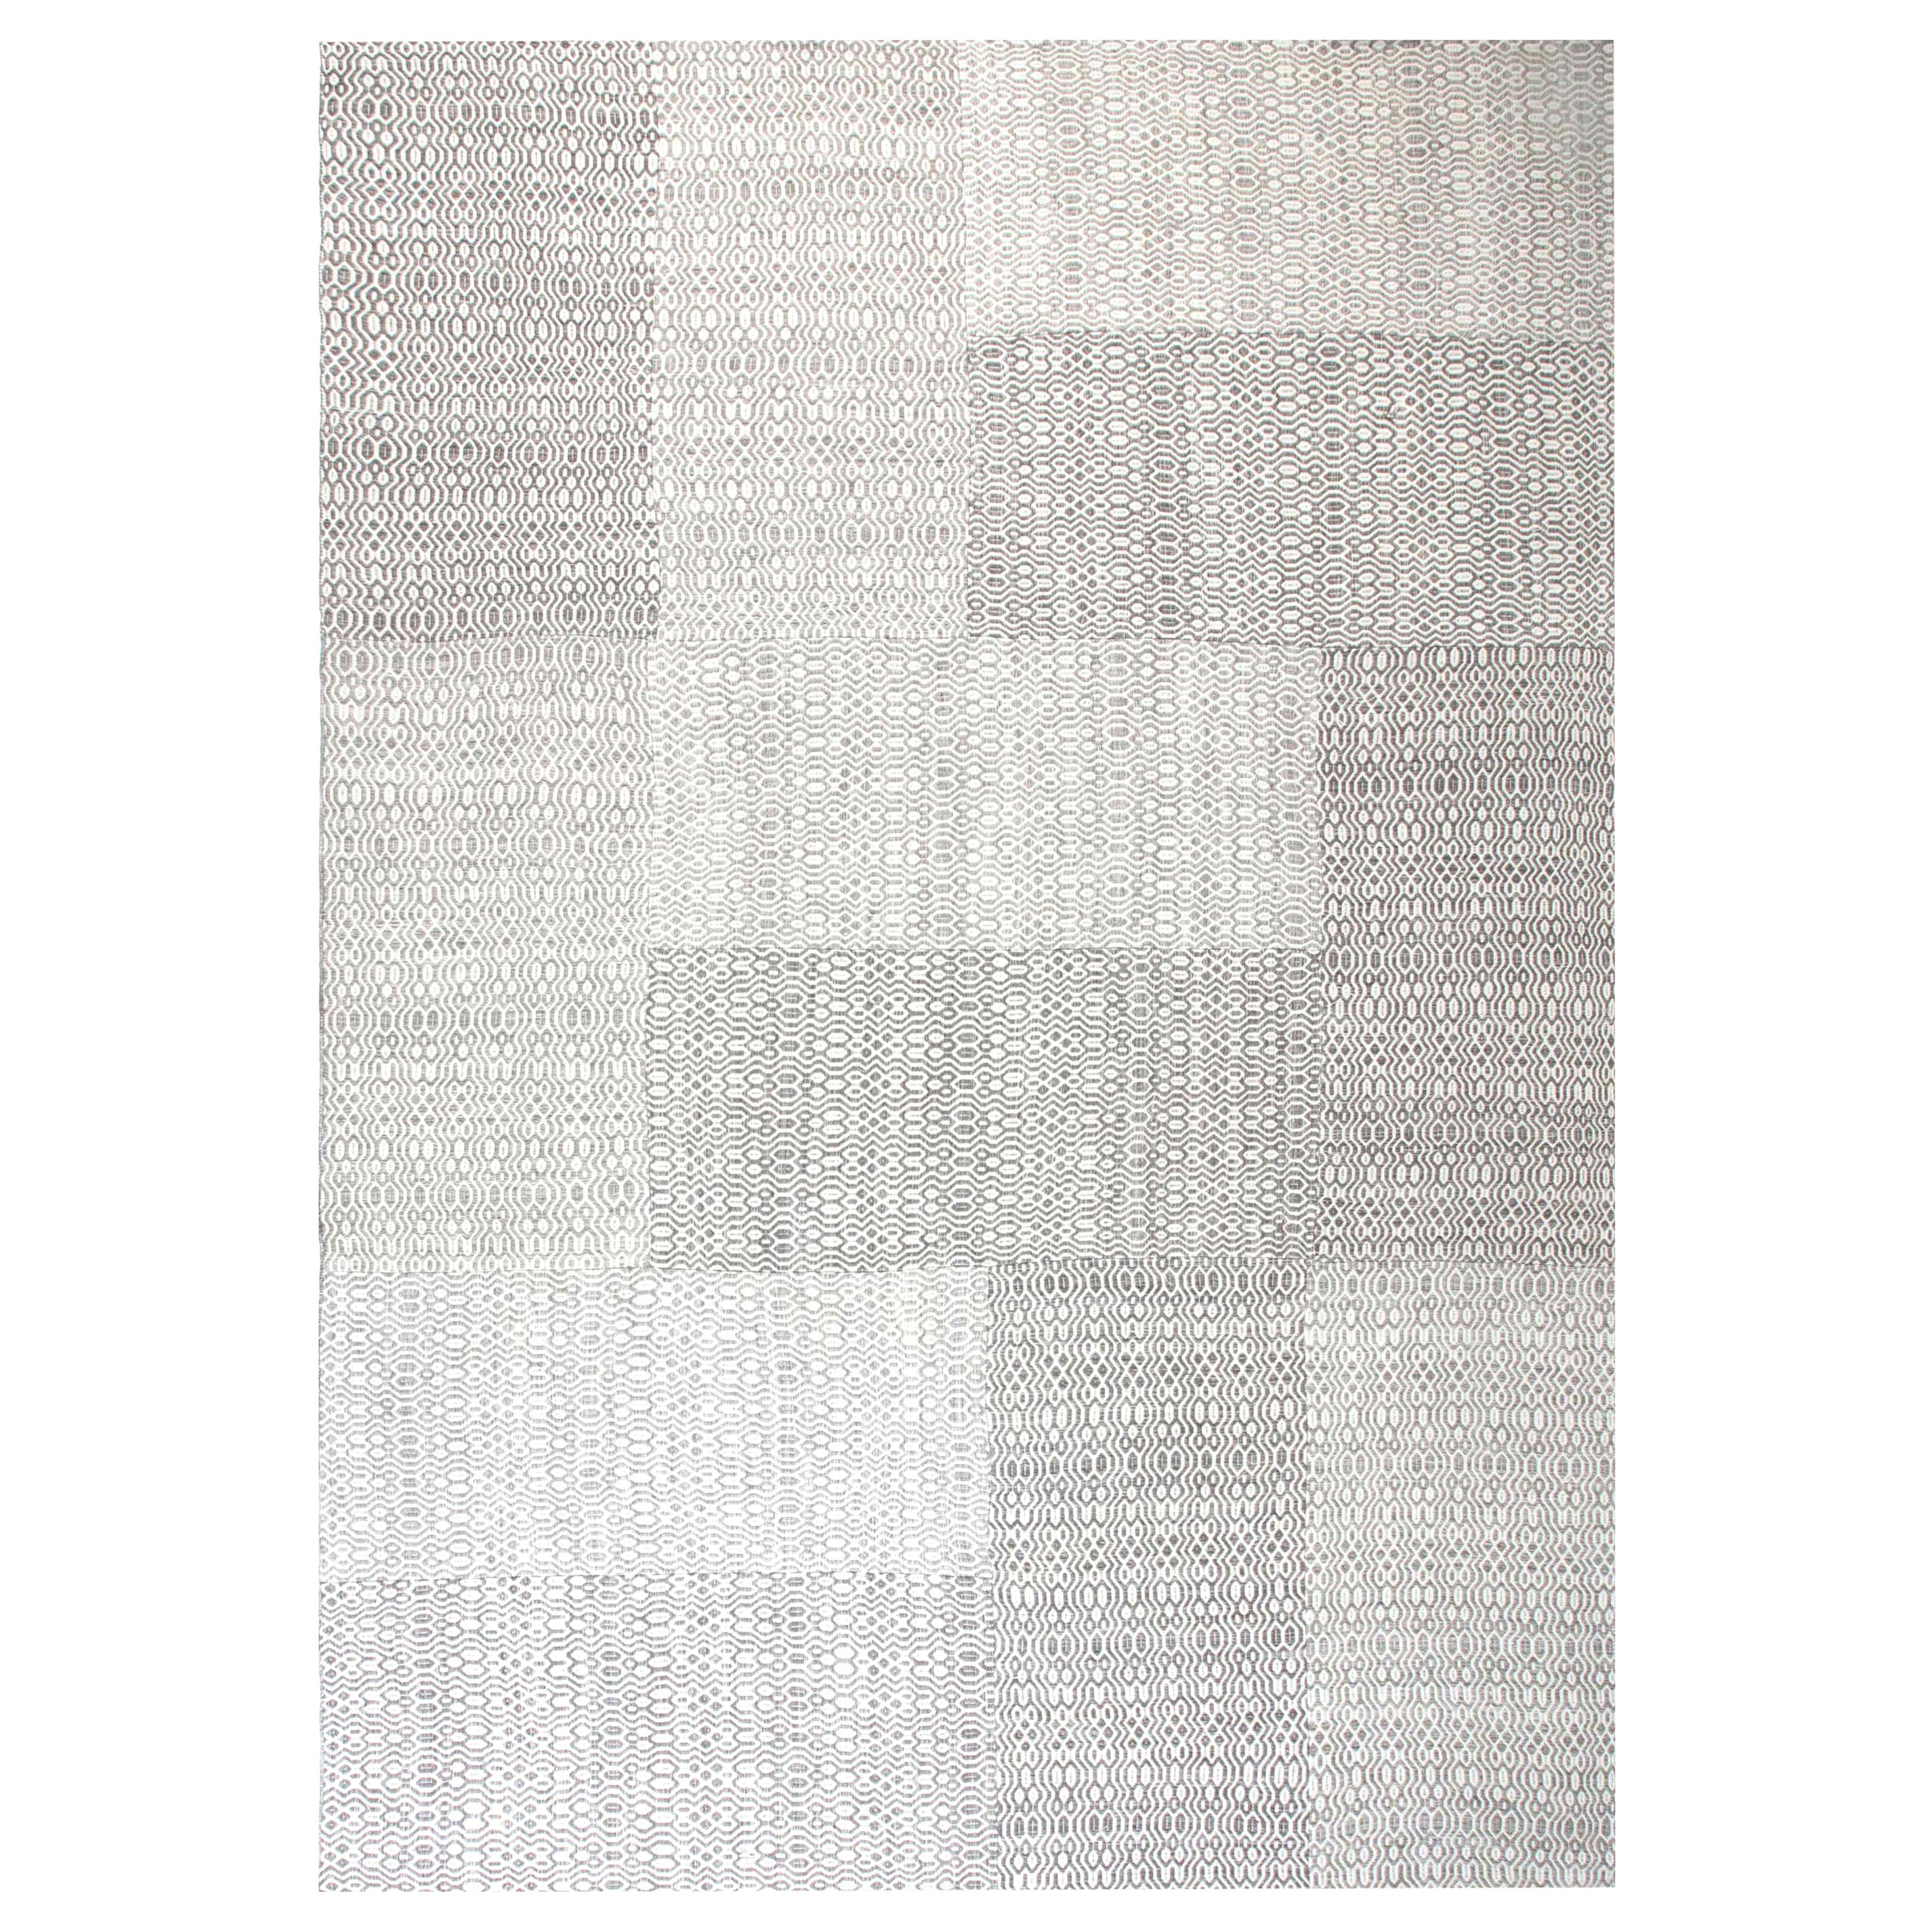 Contemporary Gray and White Flat-Weave Wool Rug by Doris Leslie Blau